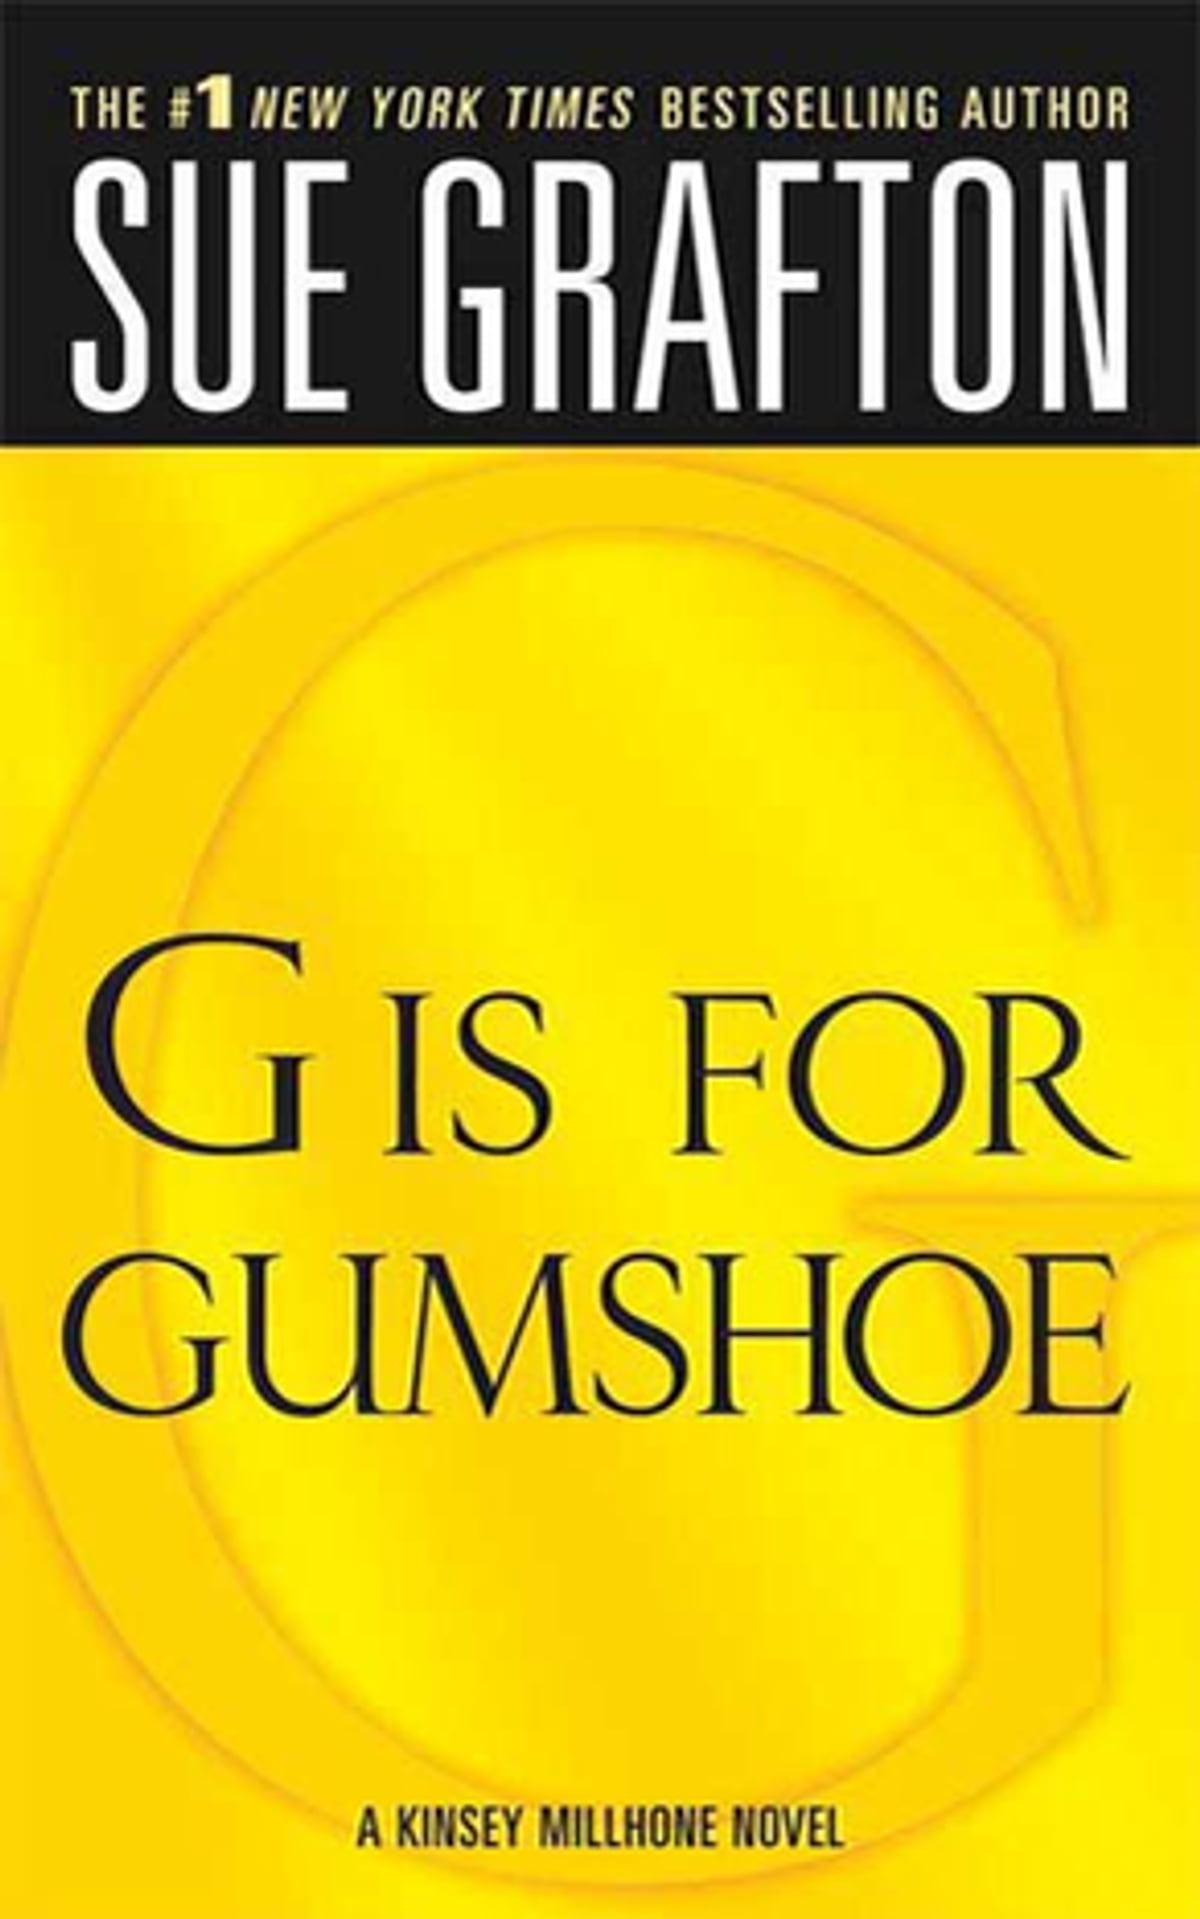 Cover of "G" is for Gumshoe by Sue Grafton.